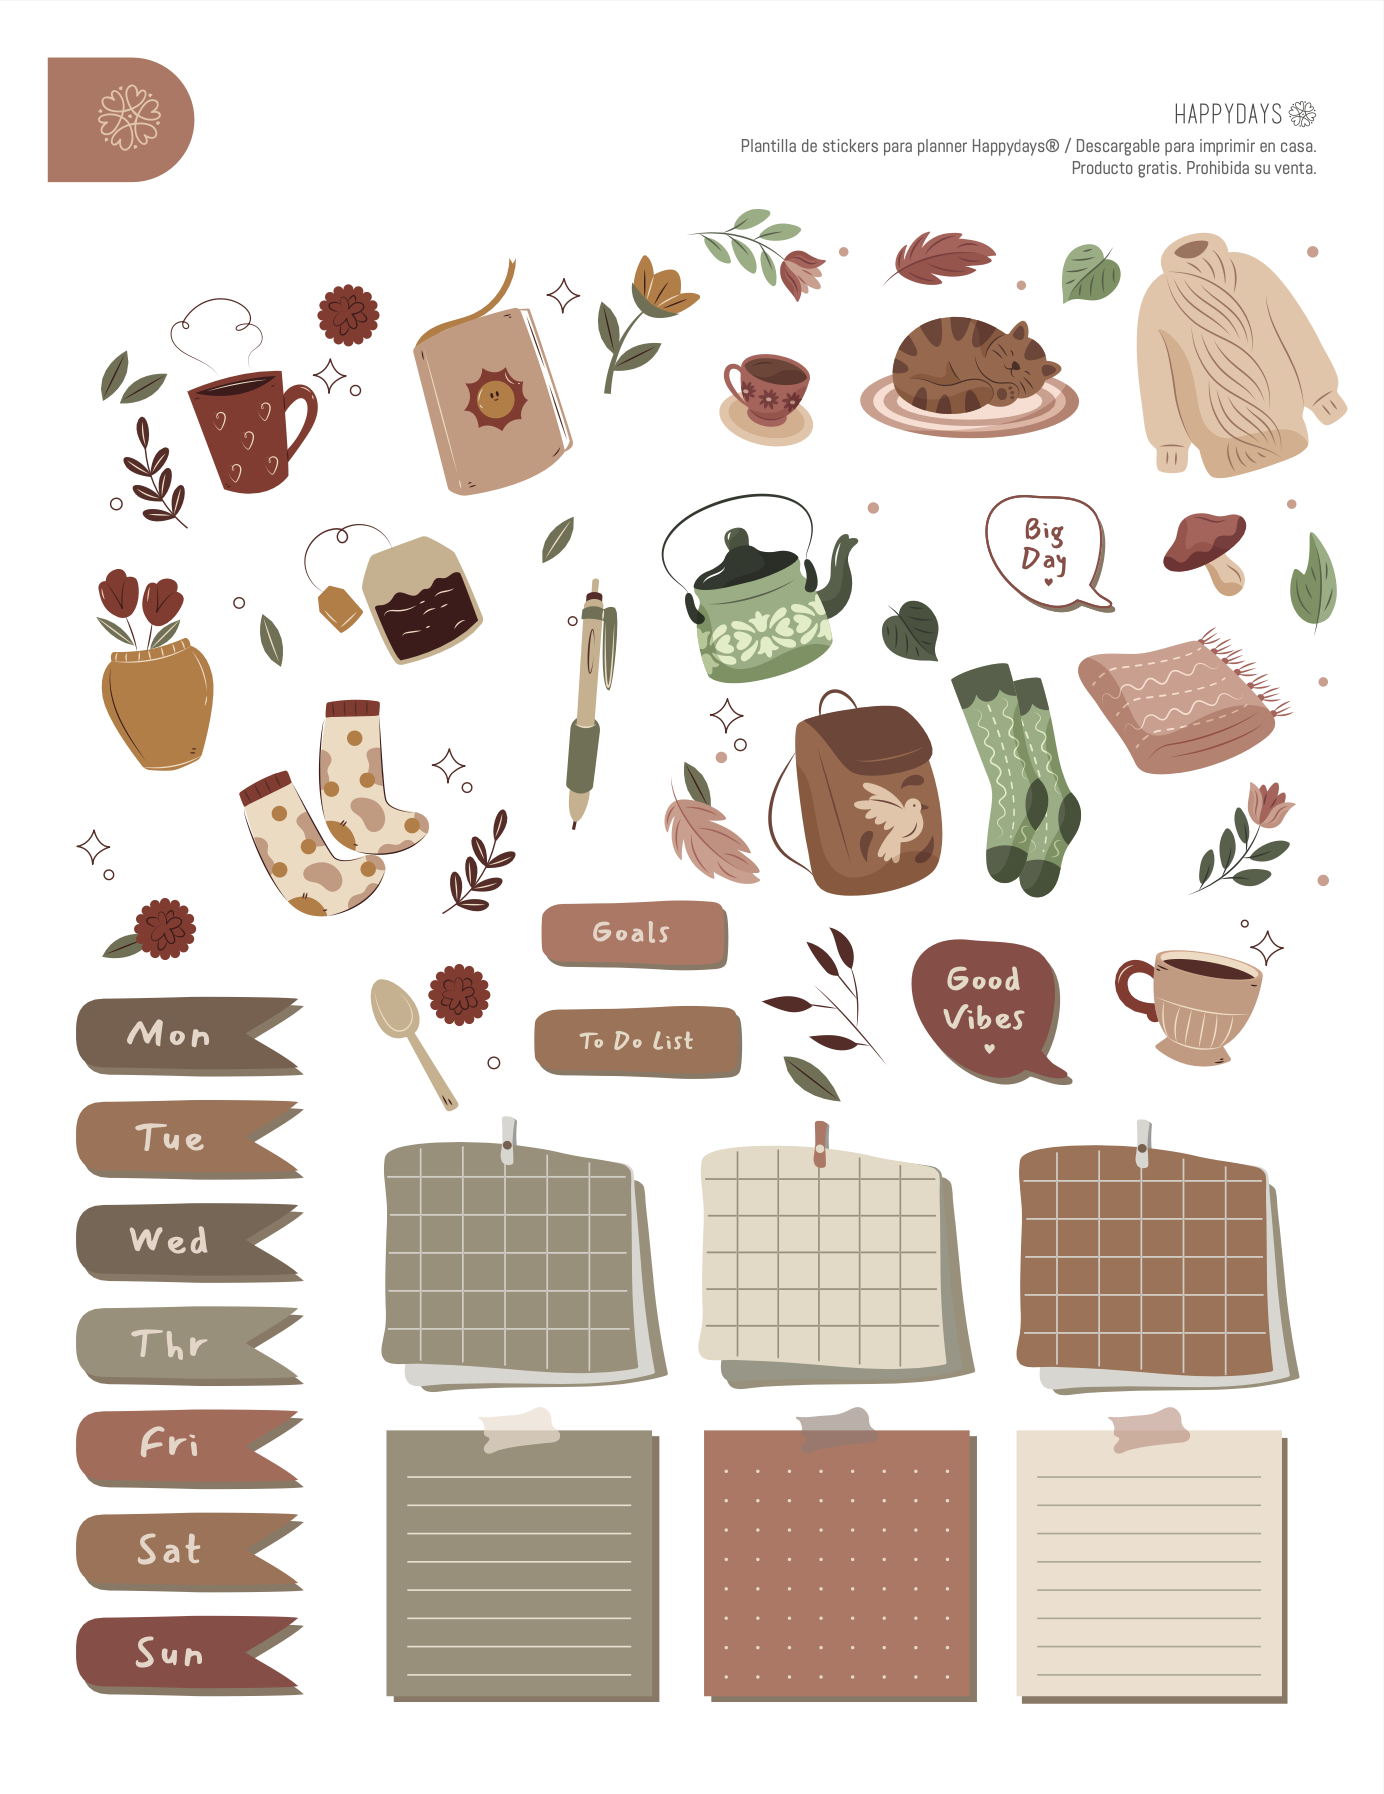 Fall is coming Stickers Gratis